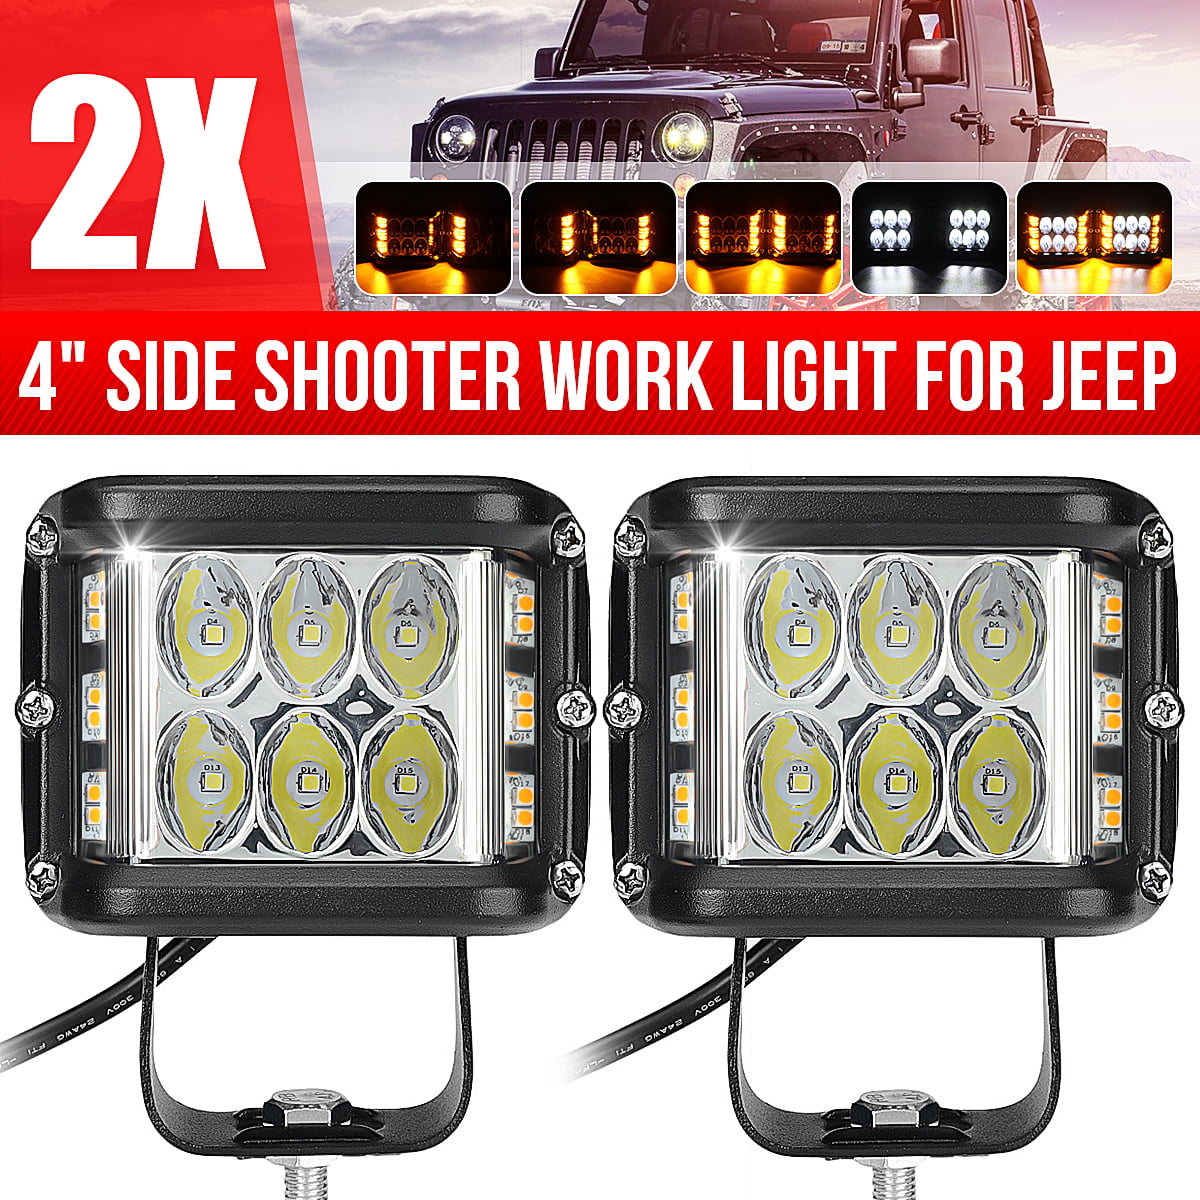 4X 3" Led Work Light Cube Pods Spot ATV Fits Jeep 3X3 Reverse Offroad Driving 